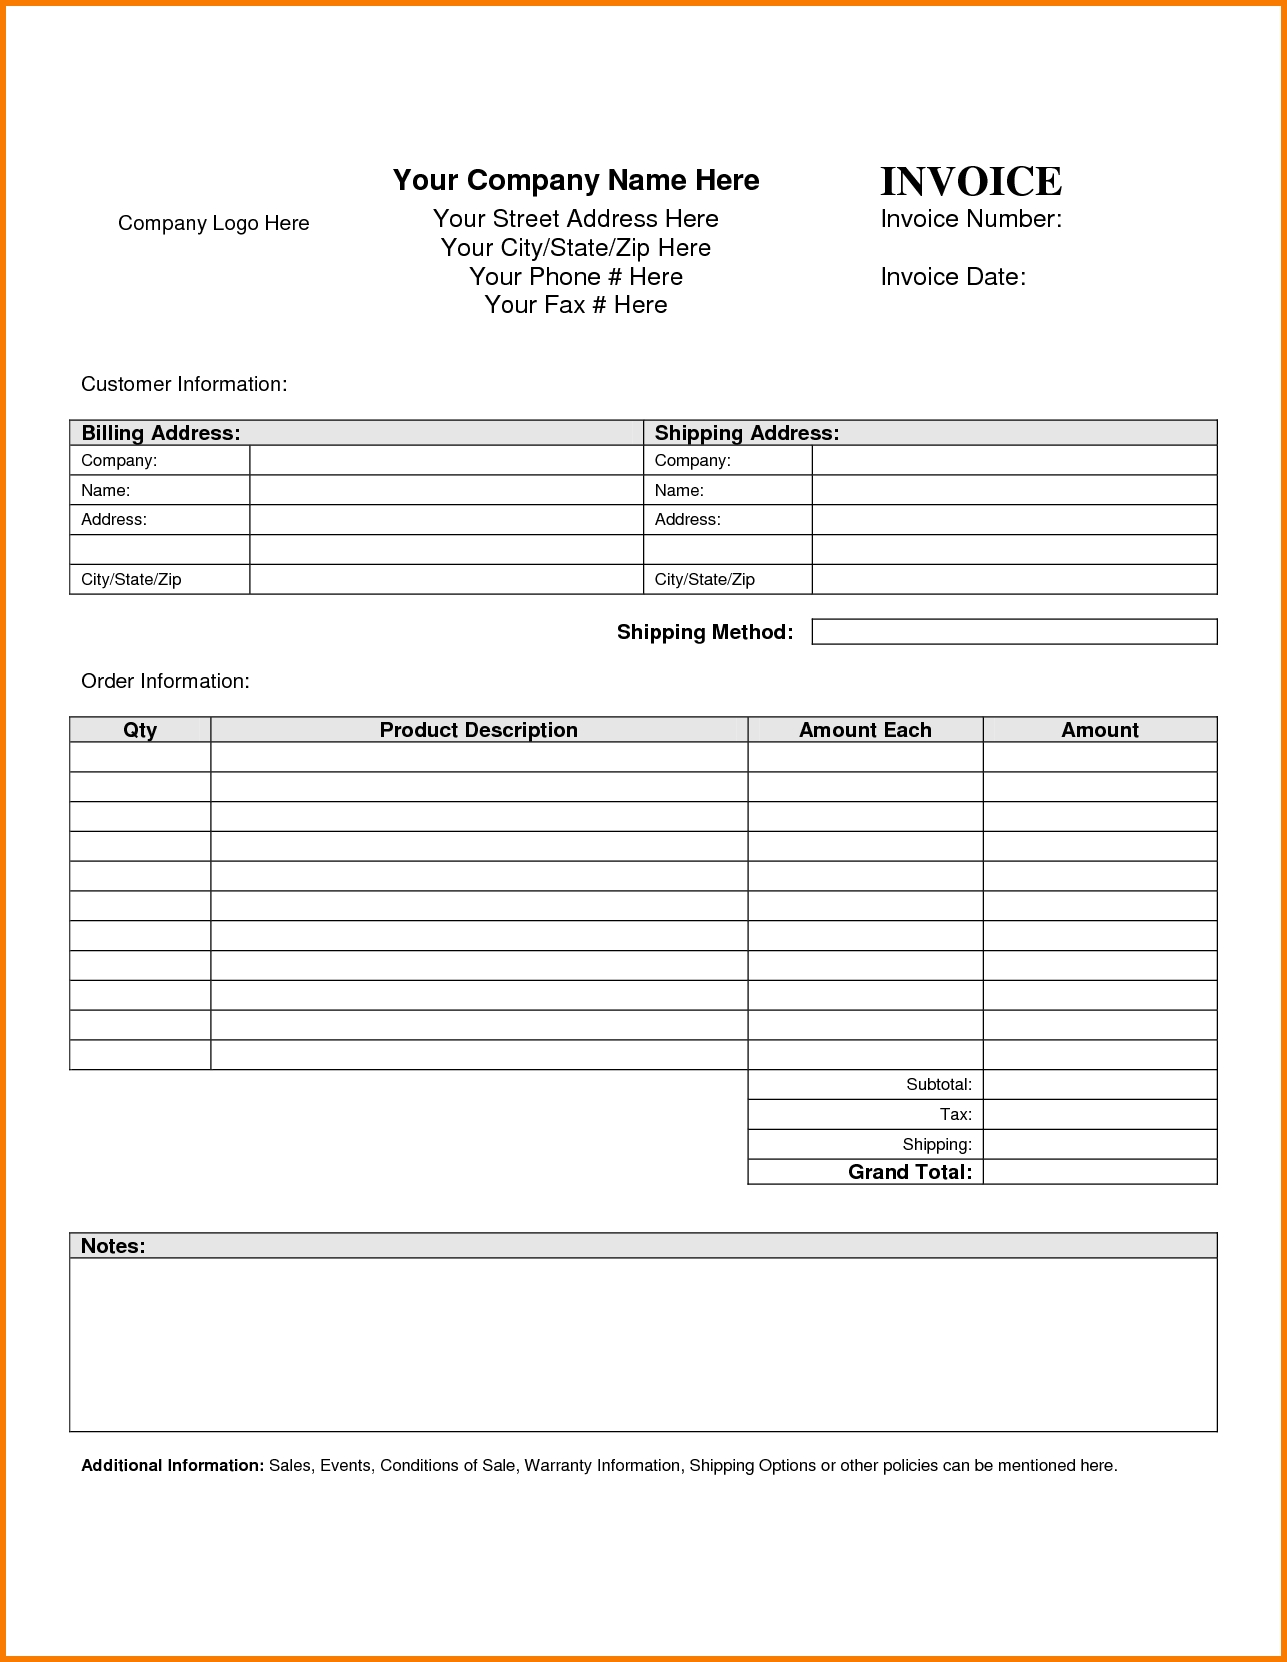 7 blank invoice form receipt templates invoice forms template